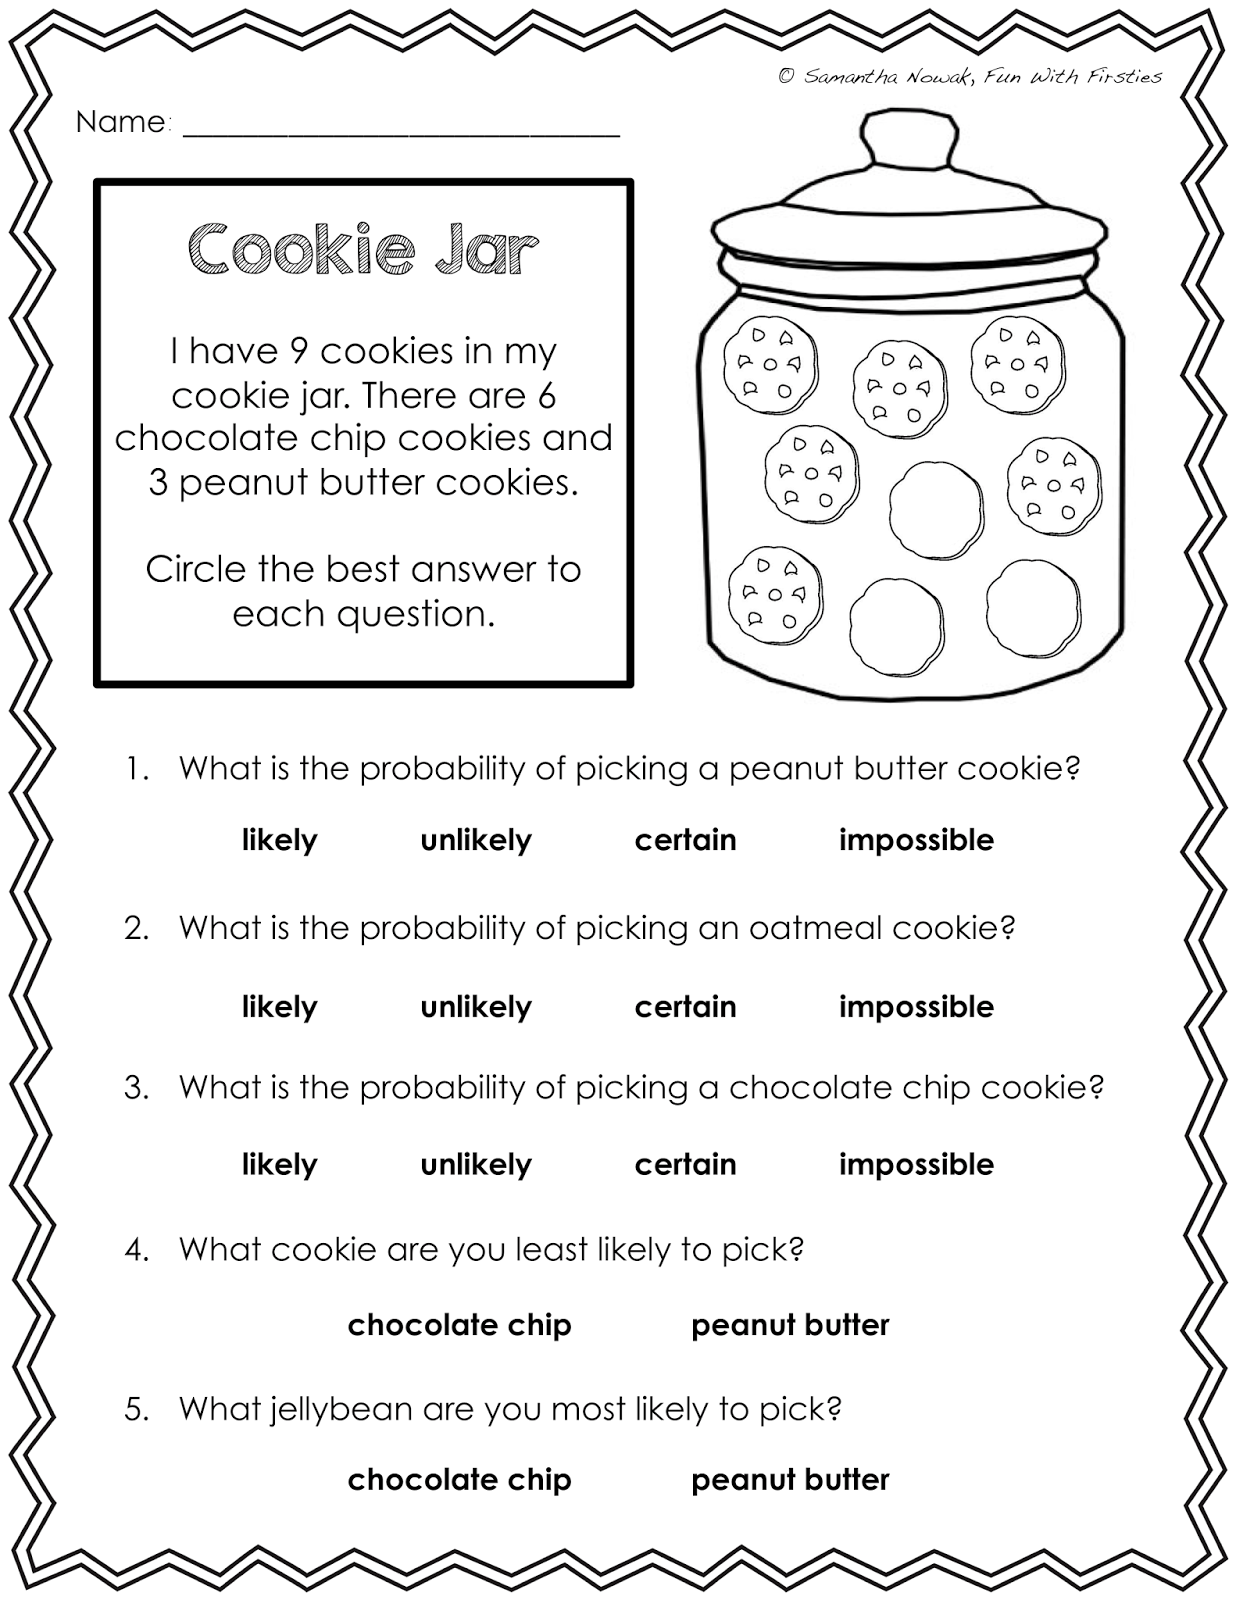 Our Probability Unit Worksheets  Activities  Lessons  And